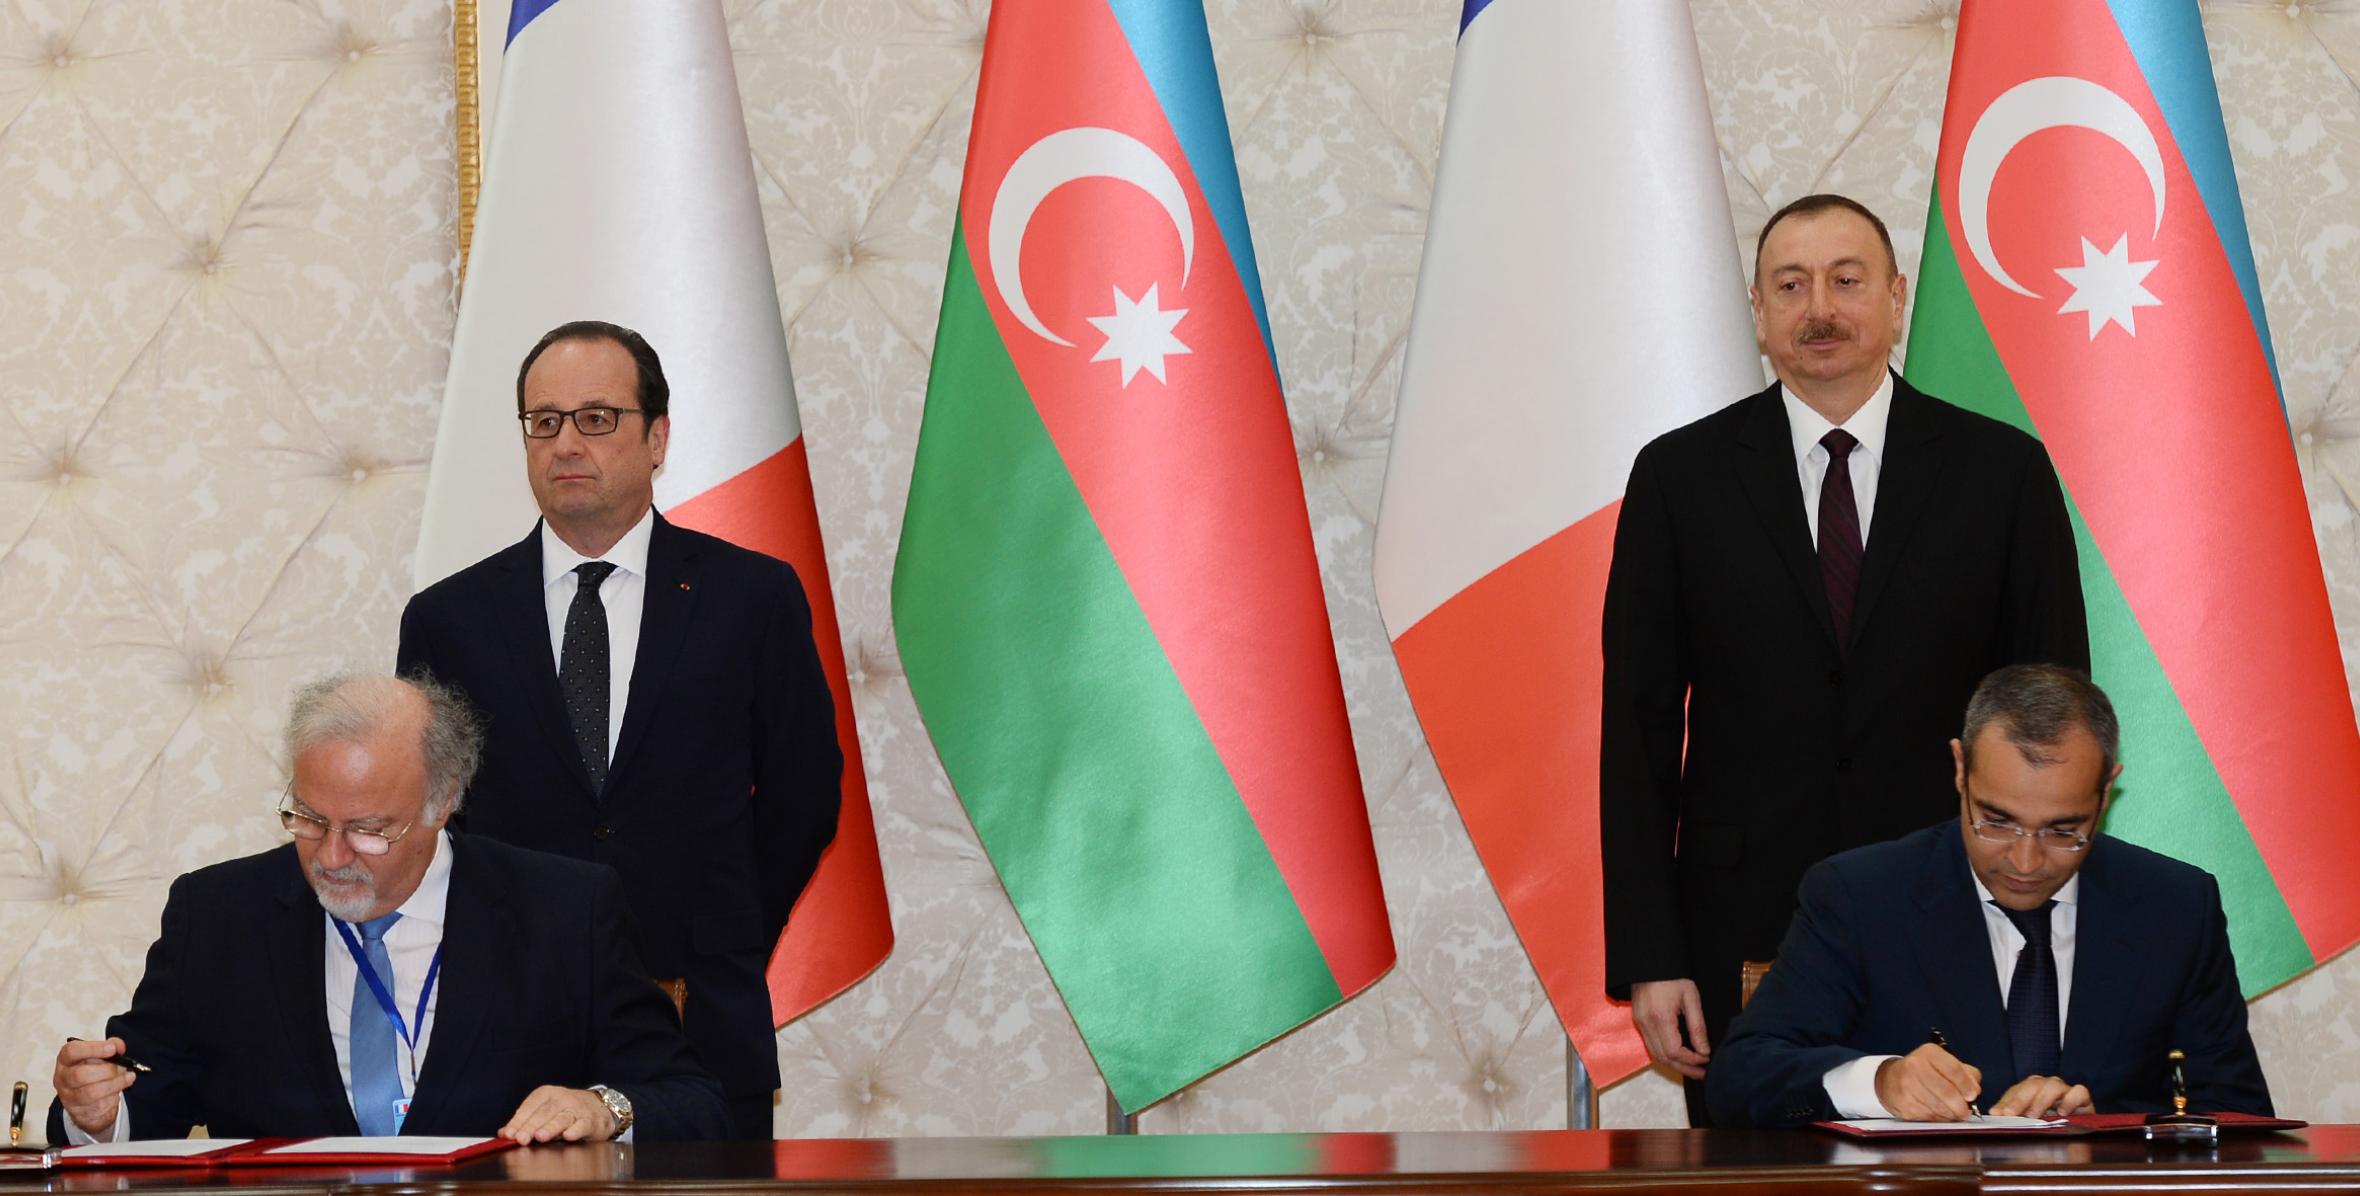 Ilham Aliyev and President of the French Republic Francois Hollande held a meeting